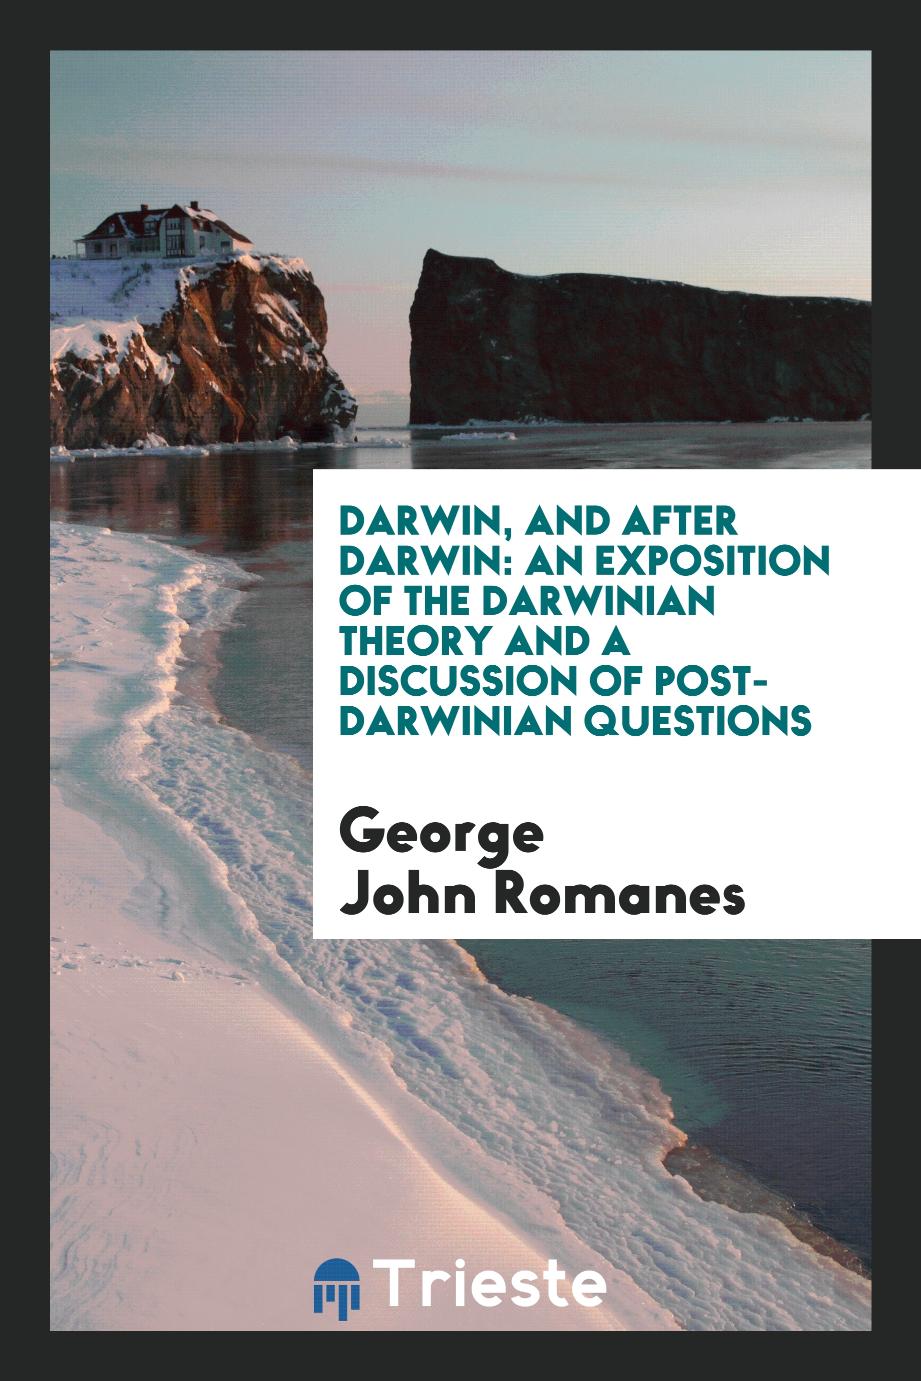 Darwin, and After Darwin: An Exposition of the Darwinian Theory and a Discussion of Post-Darwinian Questions